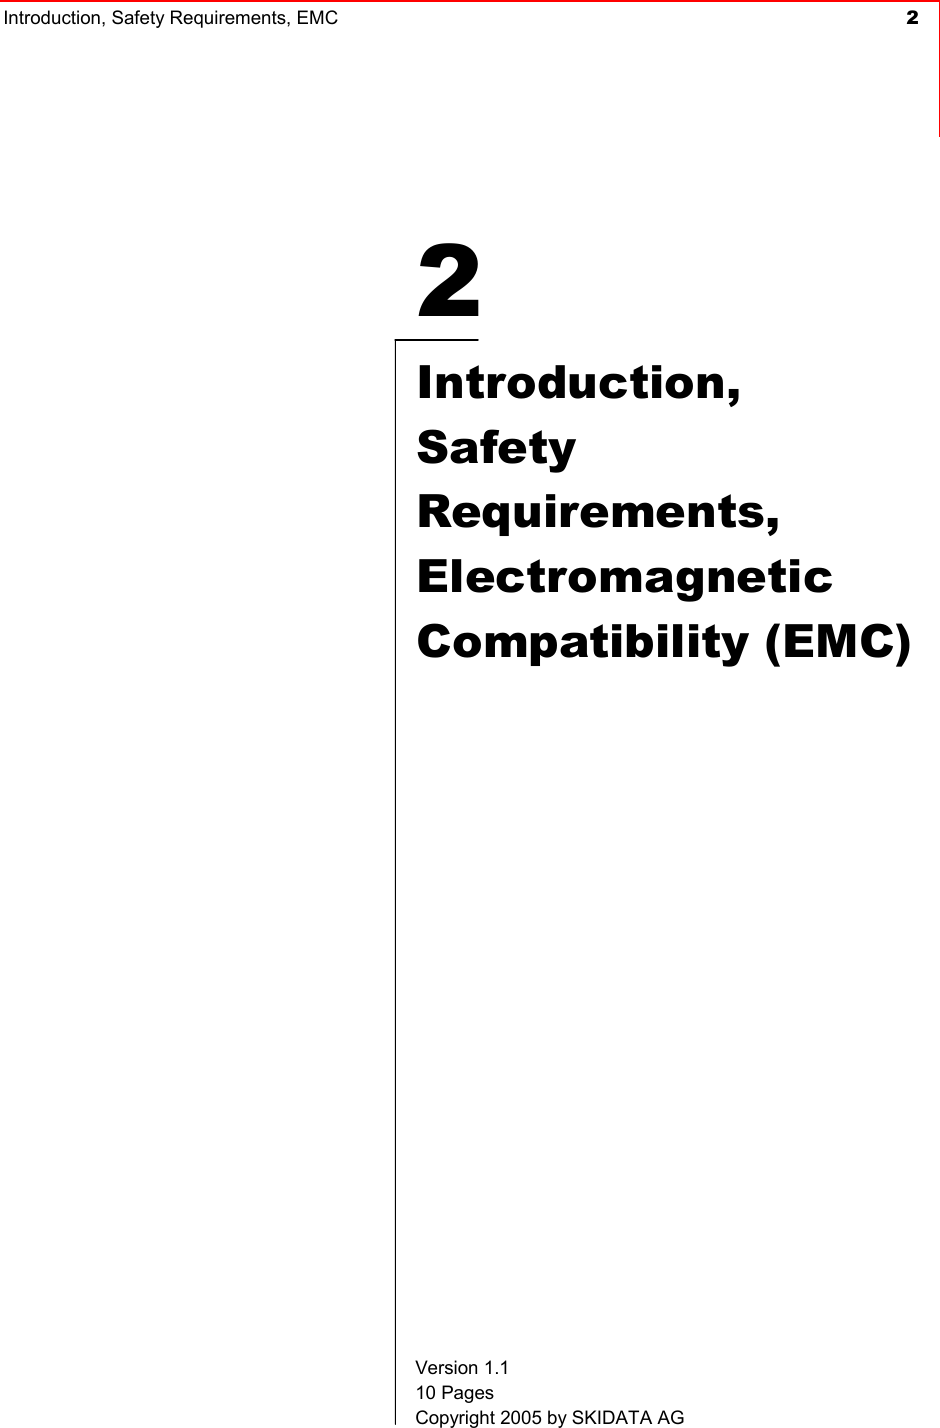 Introduction, Safety Requirements, EMC  2     2  Introduction, Safety  Requirements,  Electromagnetic Compatibility (EMC)  Version 1.1 10 Pages Copyright 2005 by SKIDATA AG 